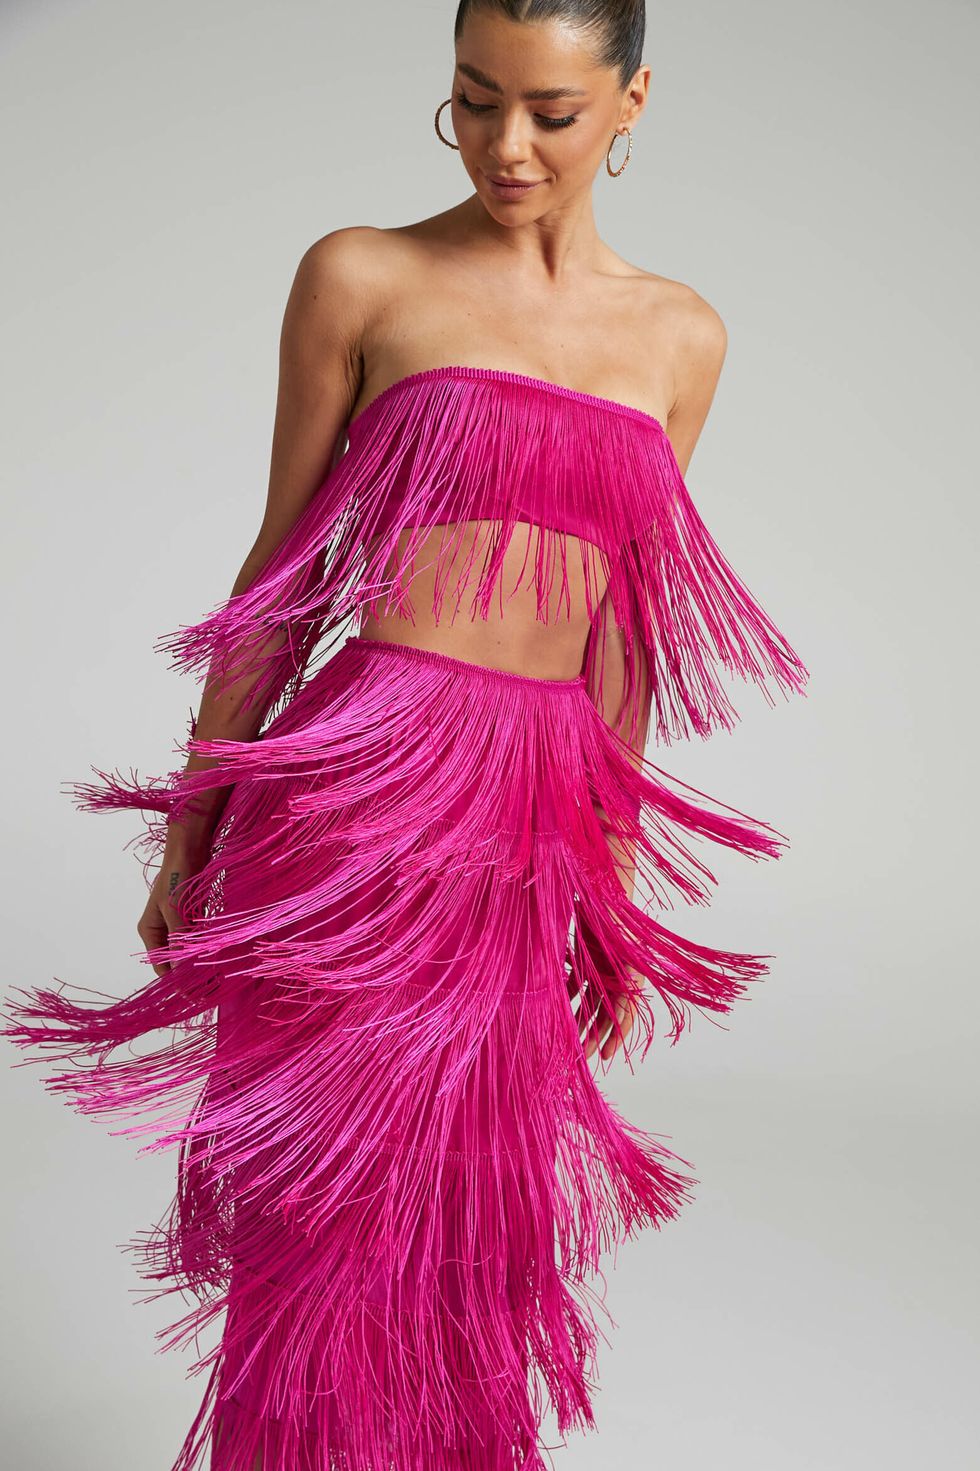 Amalee Fringe Strapless Crop Top and Midi Skirt 